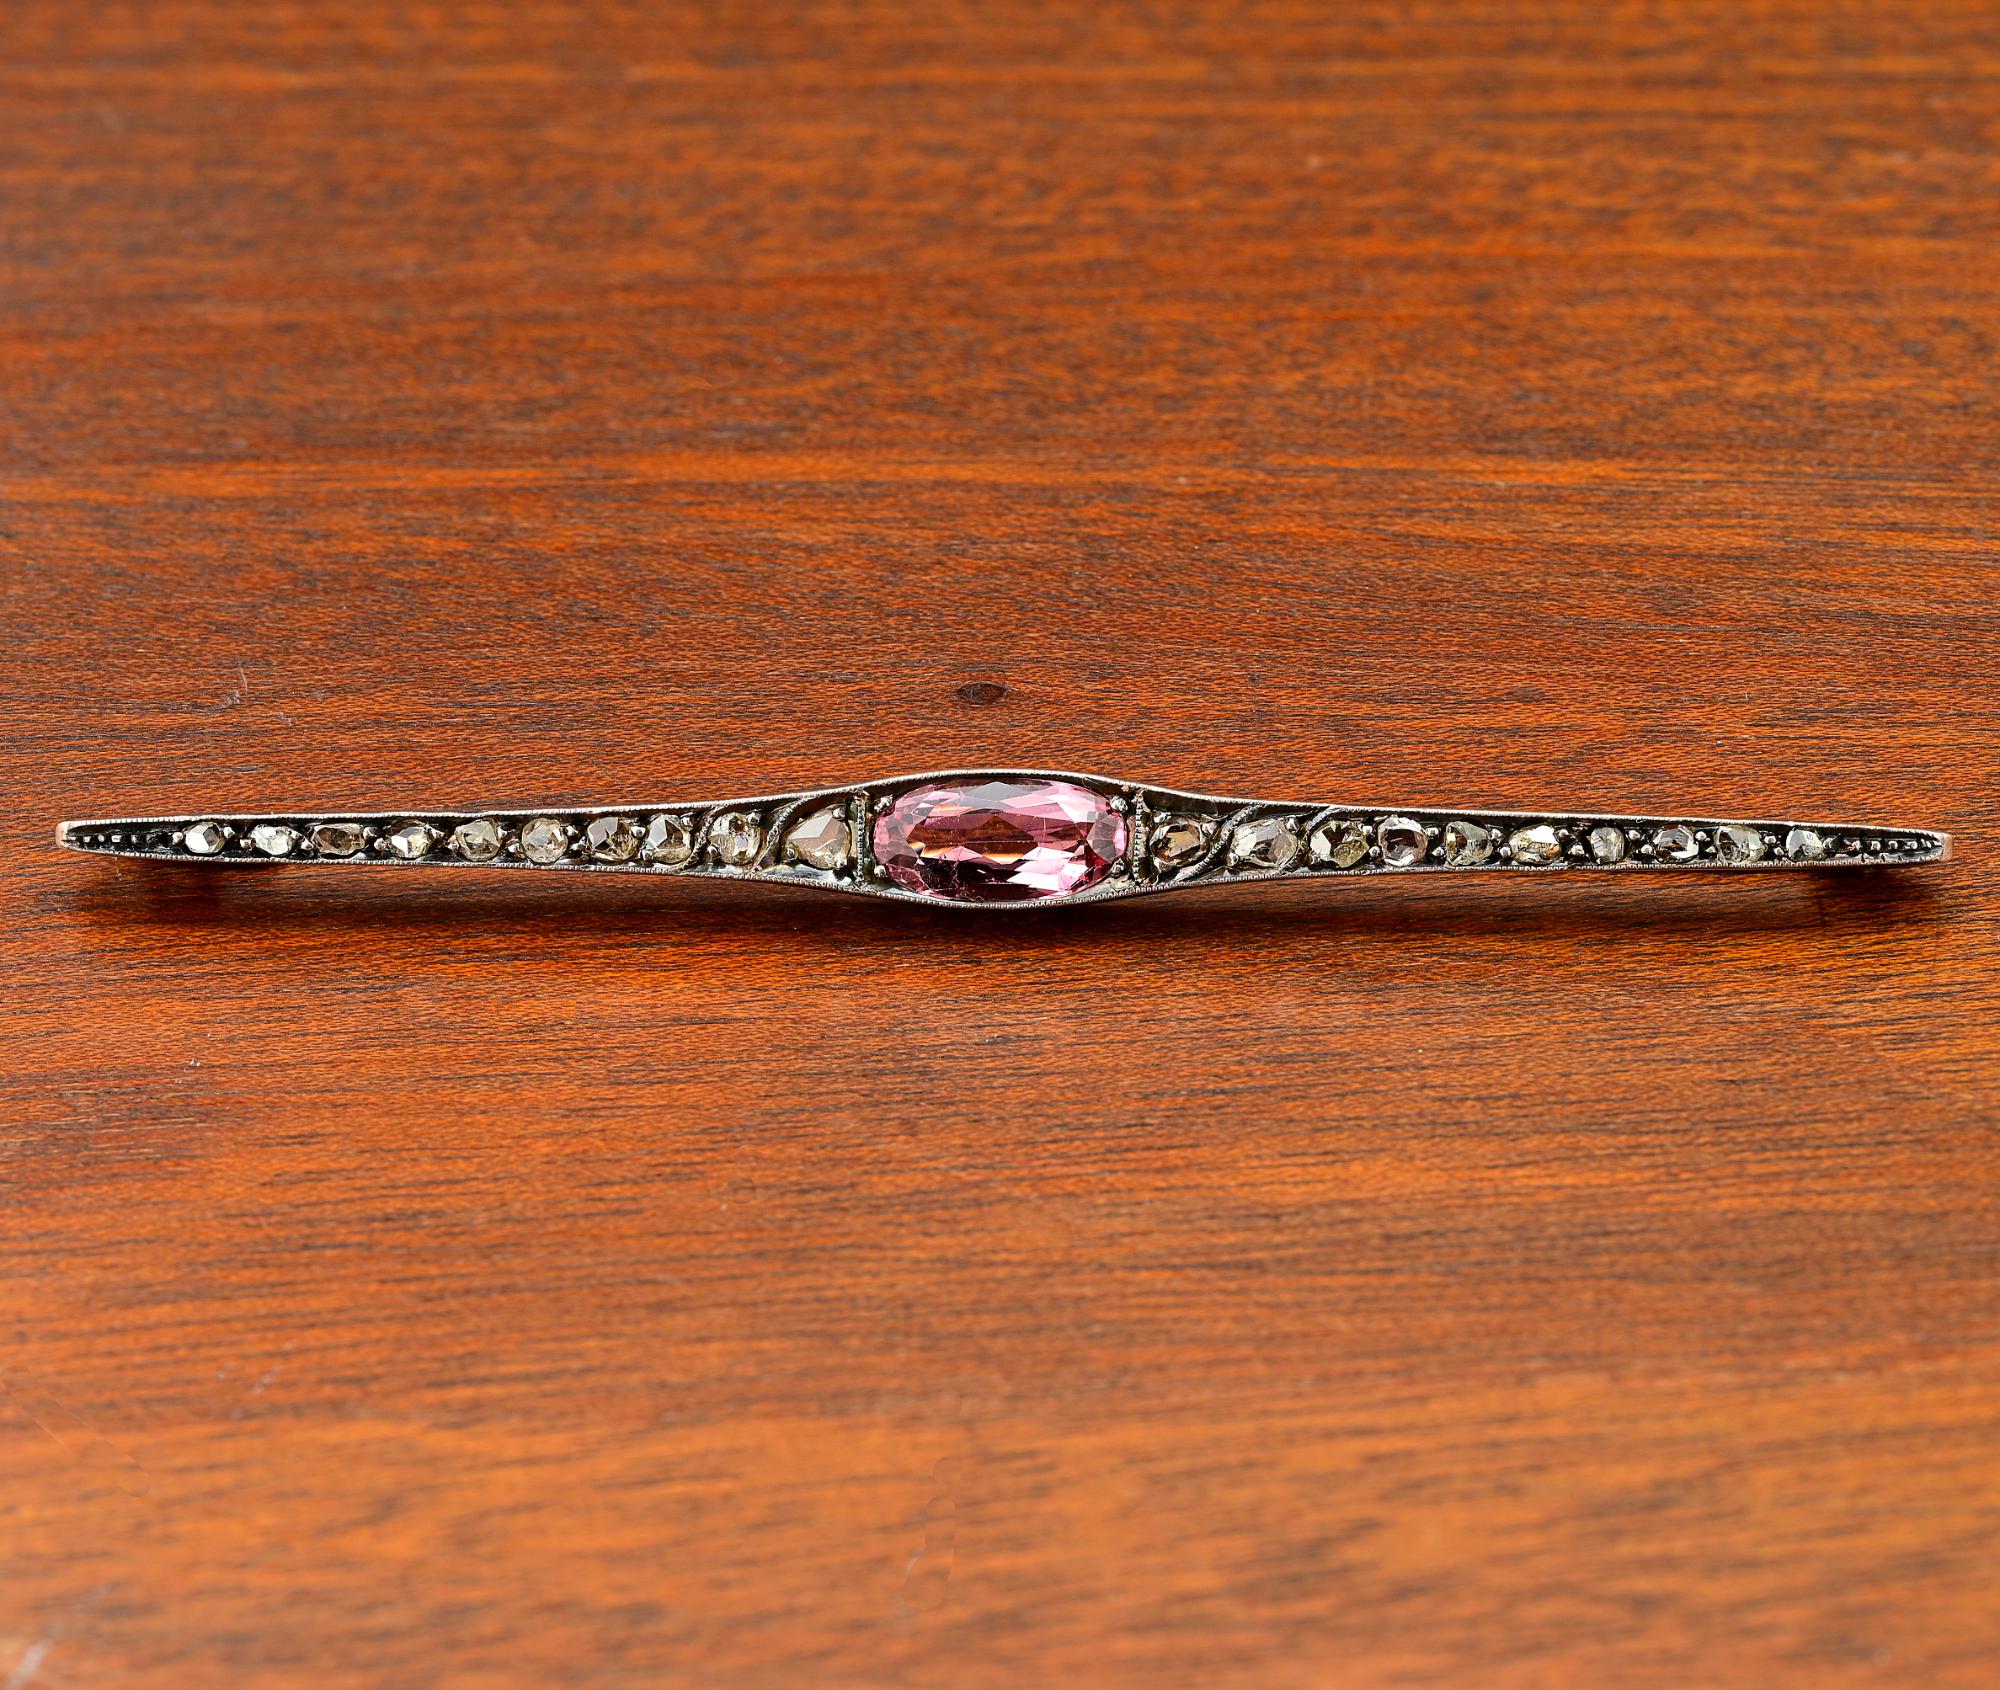 This gorgeous antique bar brooch is Victorian period, 1900 circa
Exquisitely hand crafted of solid 18 Kt gold silver topped
Essential bar design timeless and ever elegant
Centrally set with a untreated natural Pink Topaz estimated 2.15 Ct (11.90 mm.